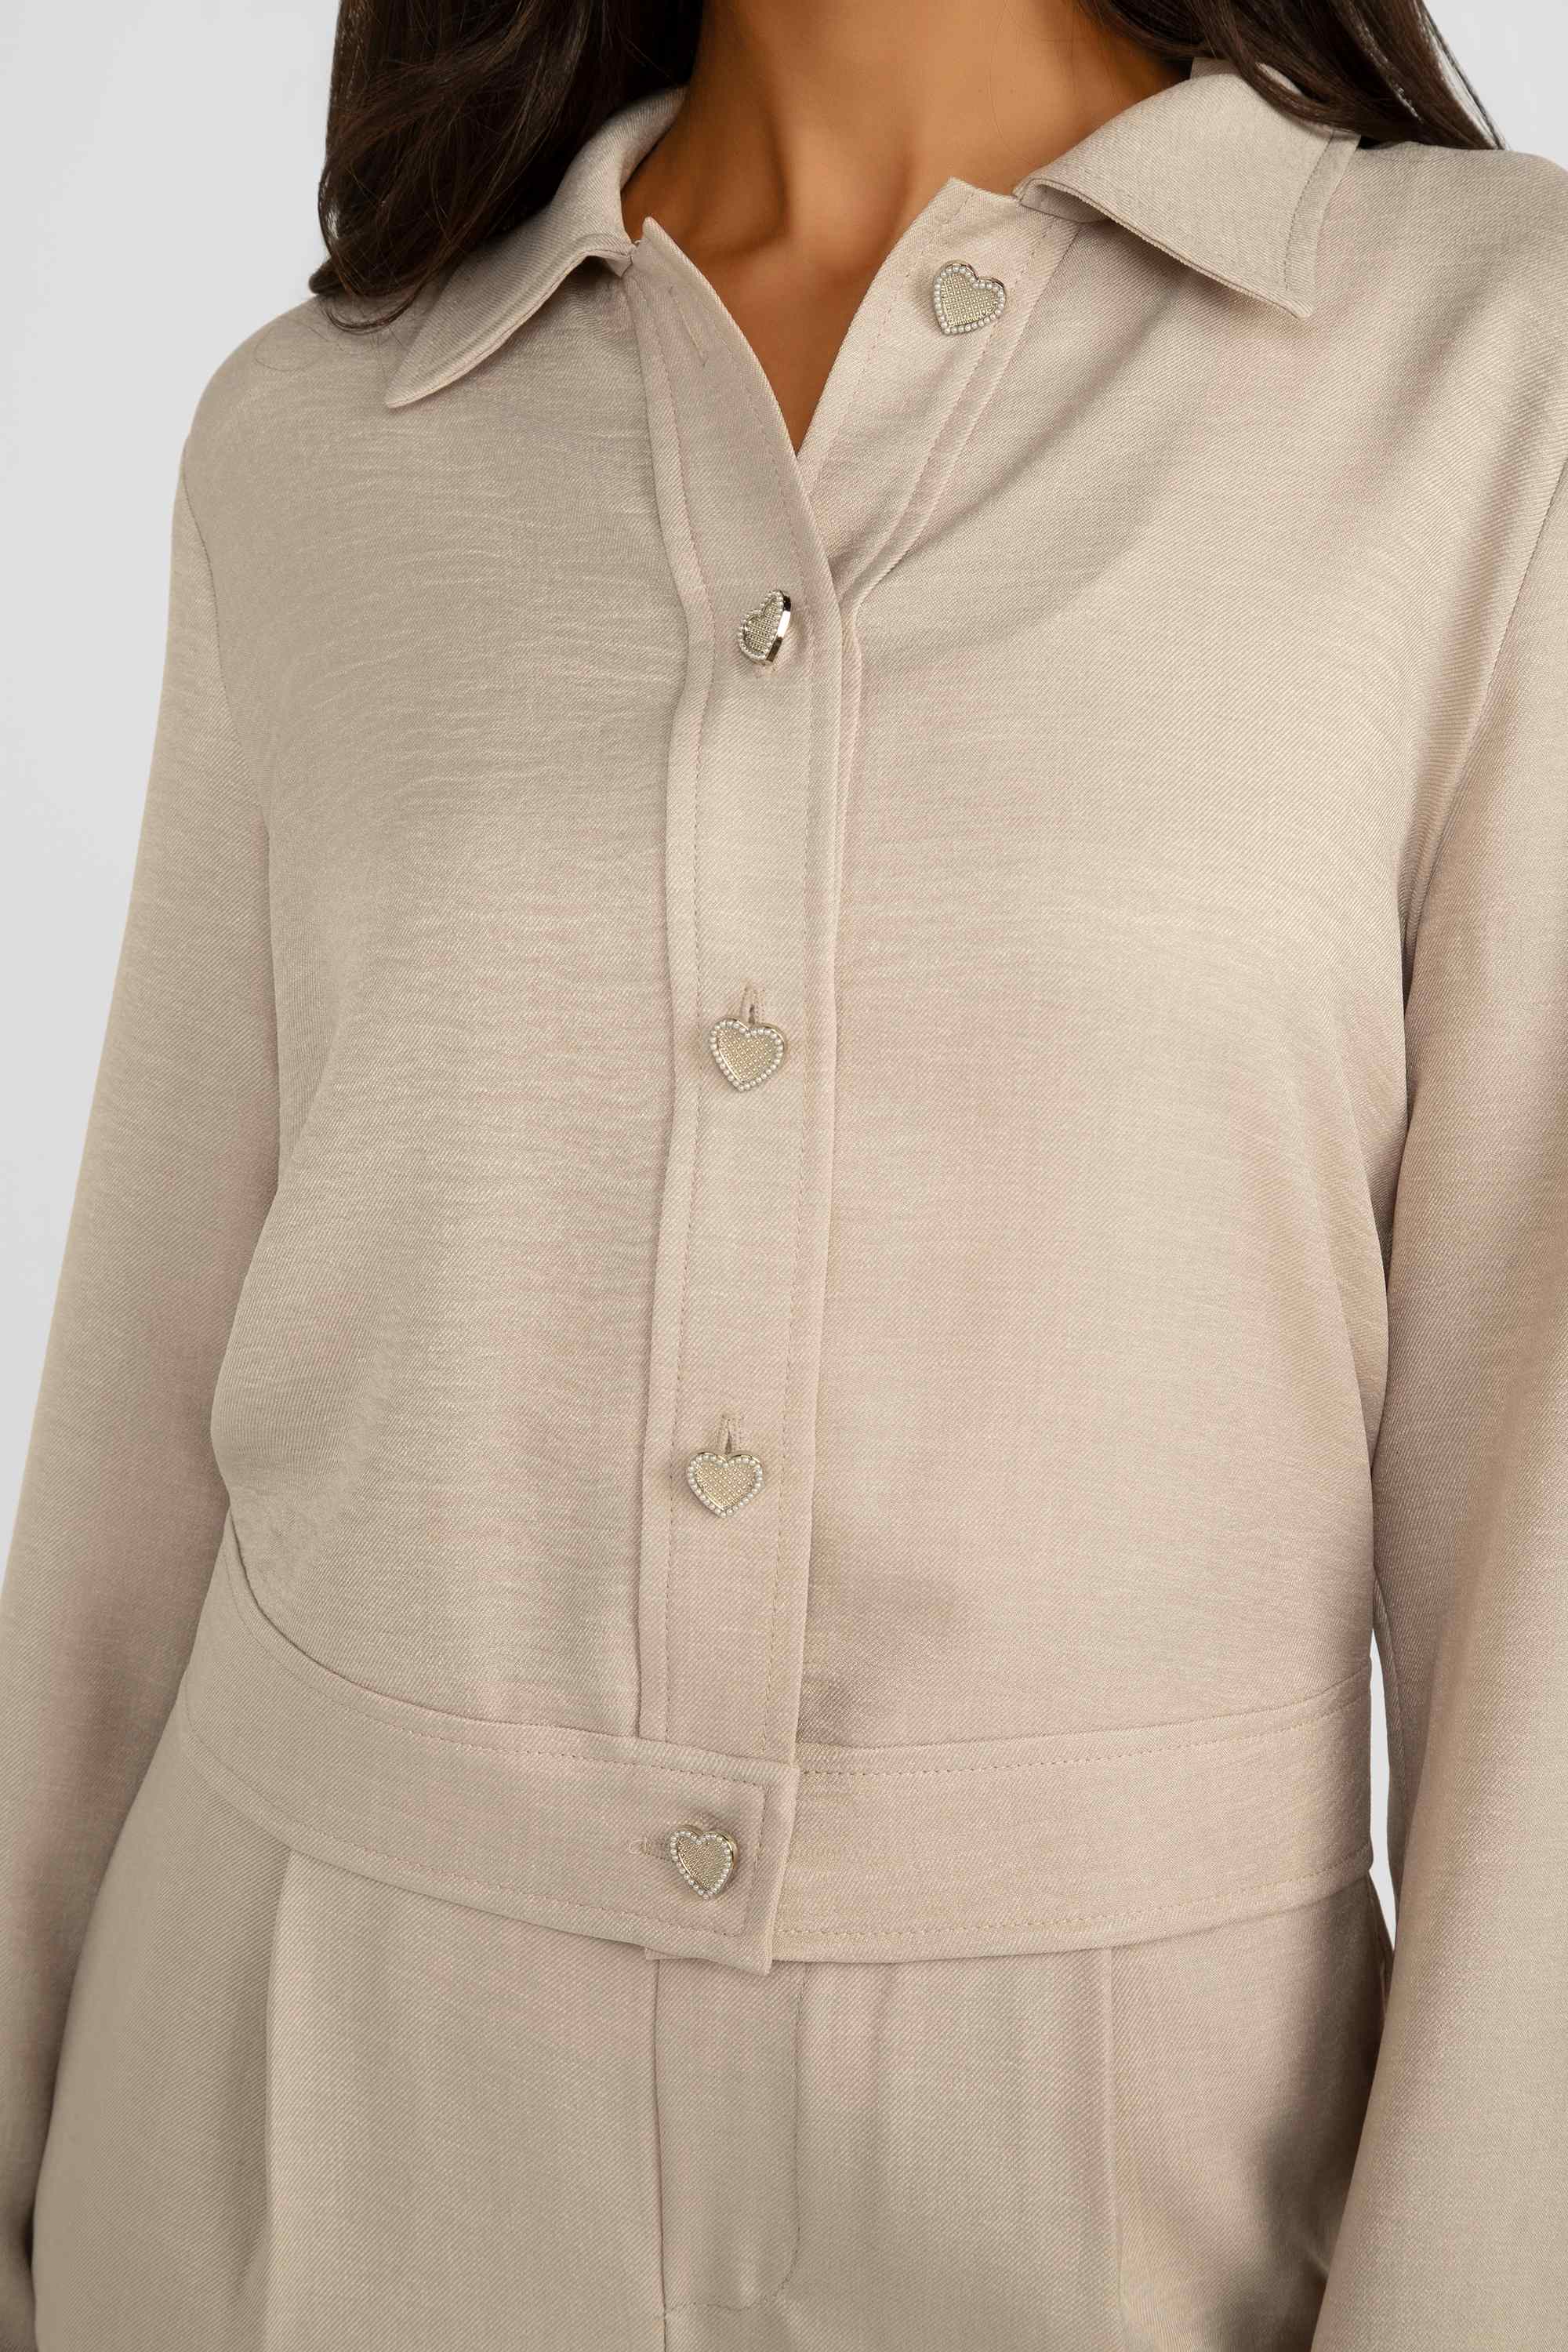 Frank Lyman (246337) Women's Long Sleeve, Button Front, Cropped Jacket with Collar in Oatmeal beige